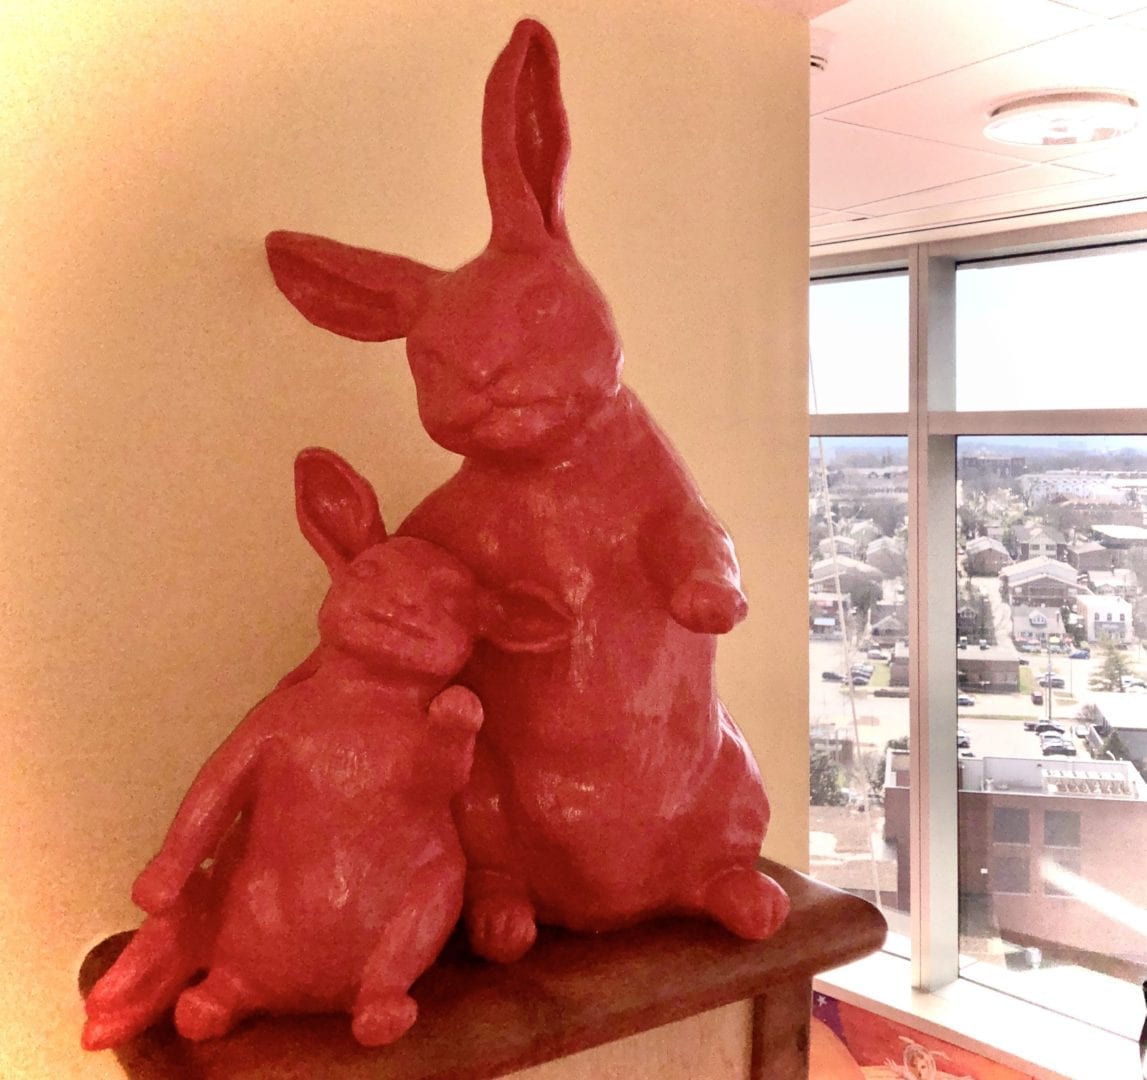 Mama and baby bunny sculpture by elevator on the 11th floor of Vanderbilt Children's Hospital. Art by Rachael McCampbell © 2020